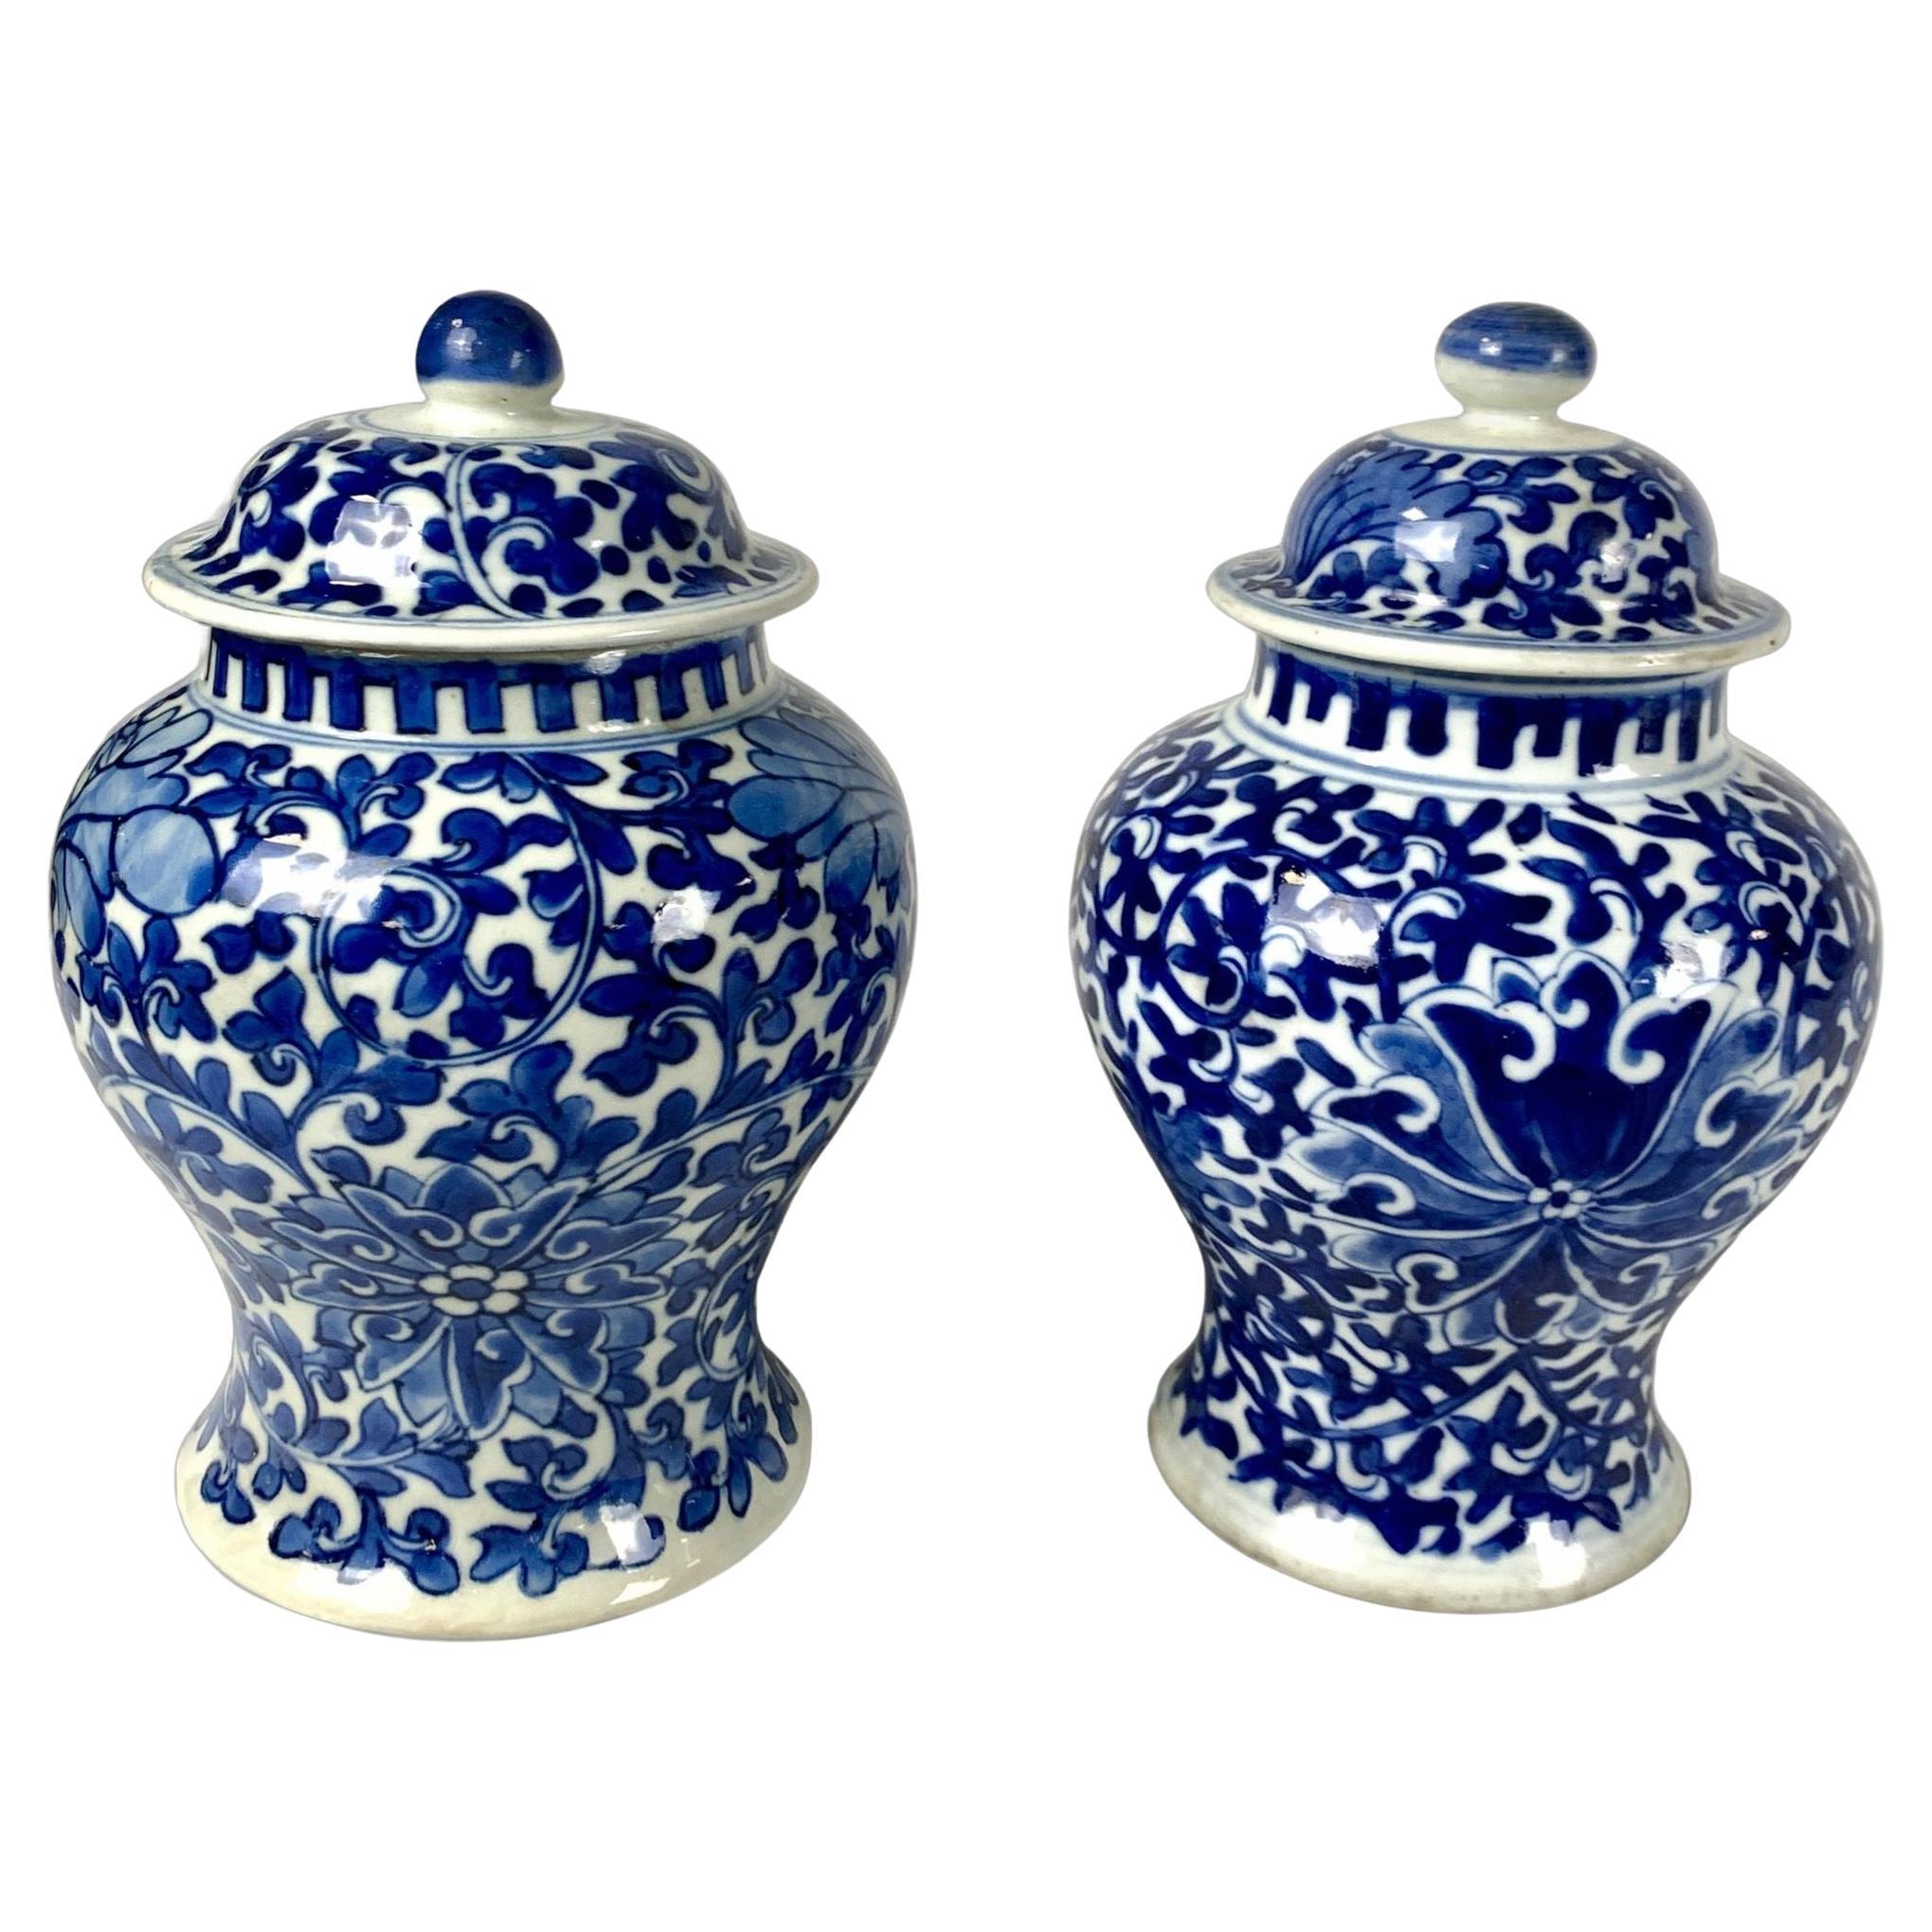 Pair Blue and White Chinese Jars Qing Dynasty Circa 1875